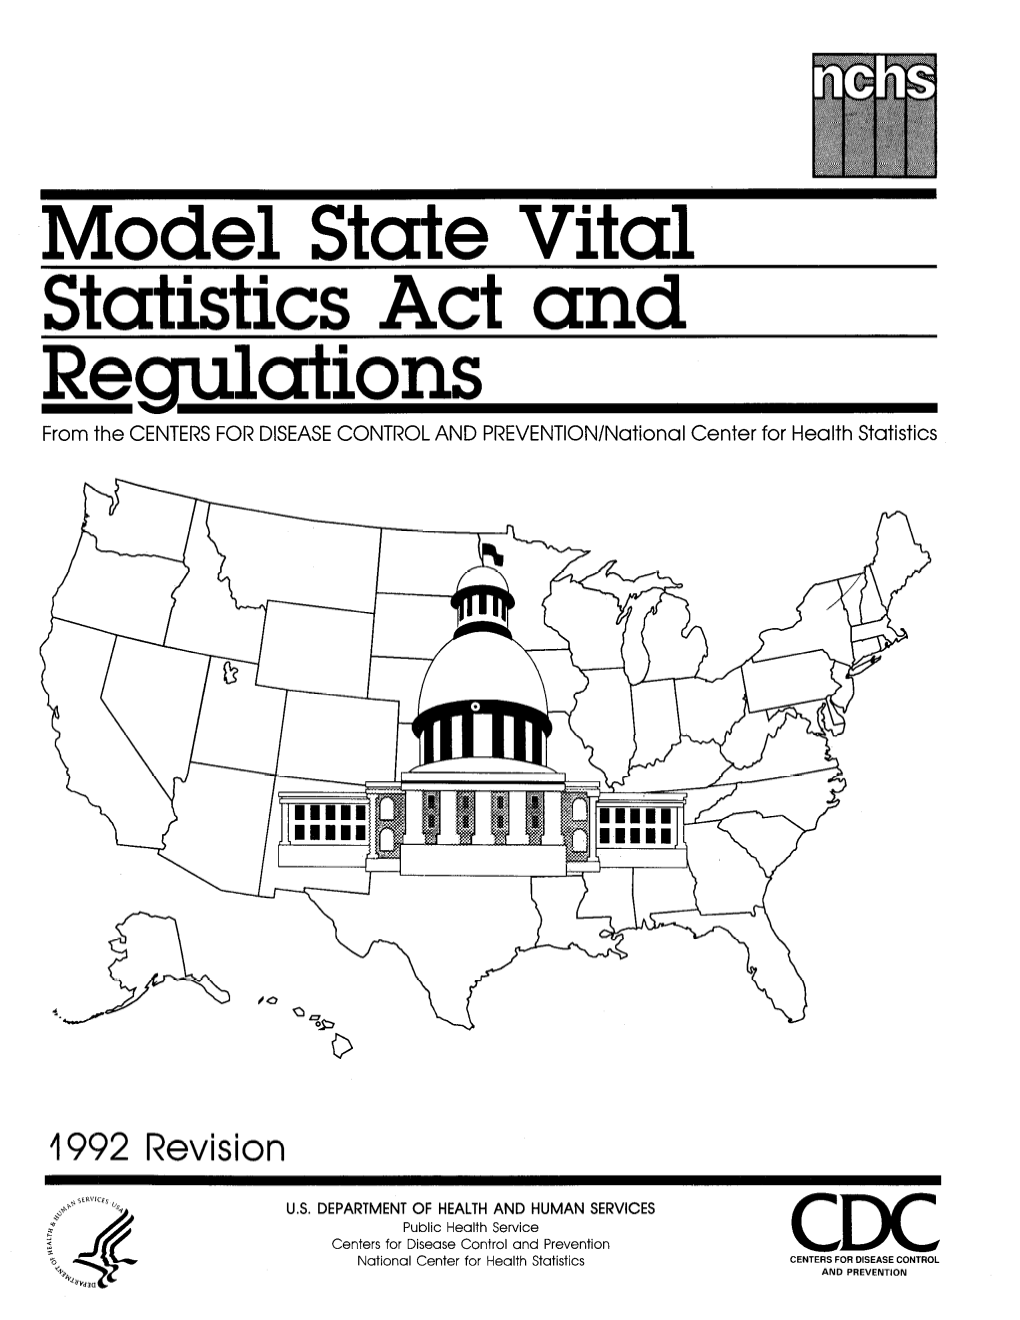 Model State Vital Statistics Act and Regulations from the CENTERS for DISEASE CONTROL and PREVENTION/National Center for Health Statistics